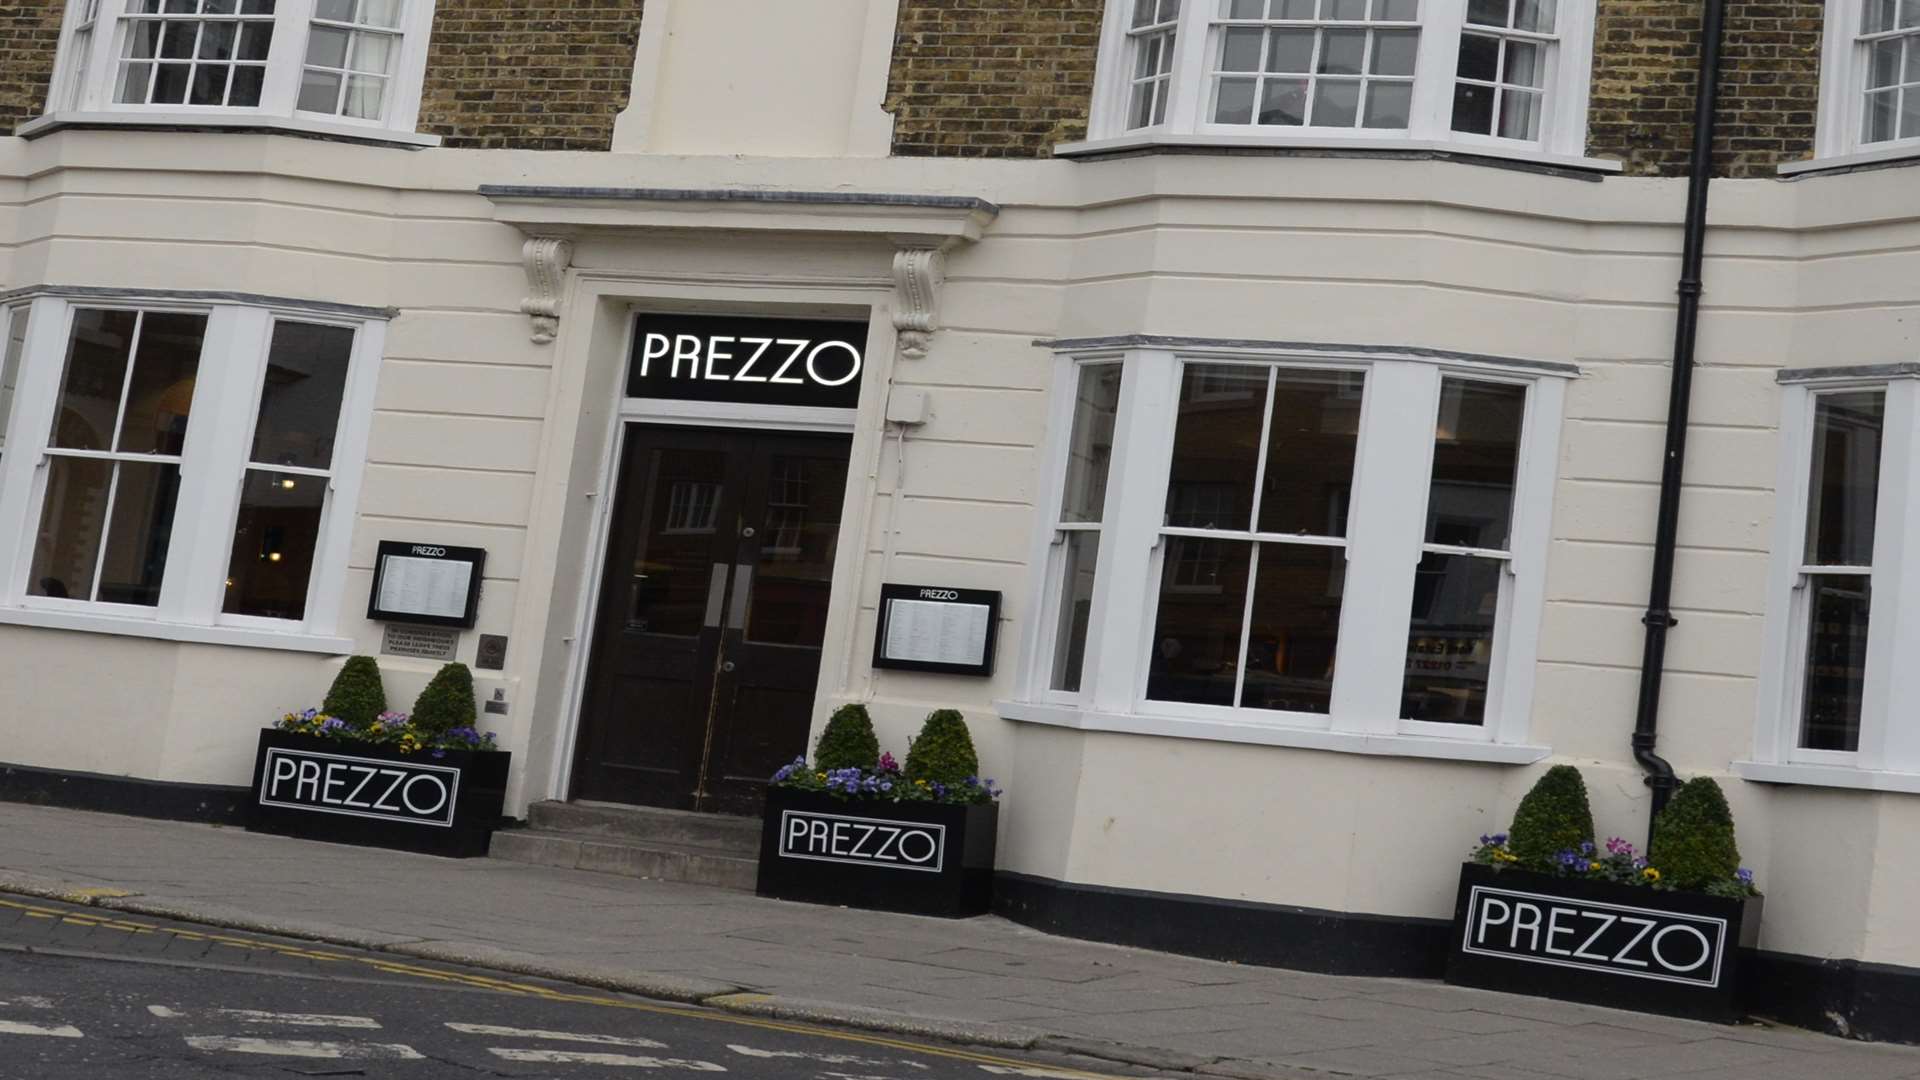 Prezzo says it is interested in opening in Sittingbourne